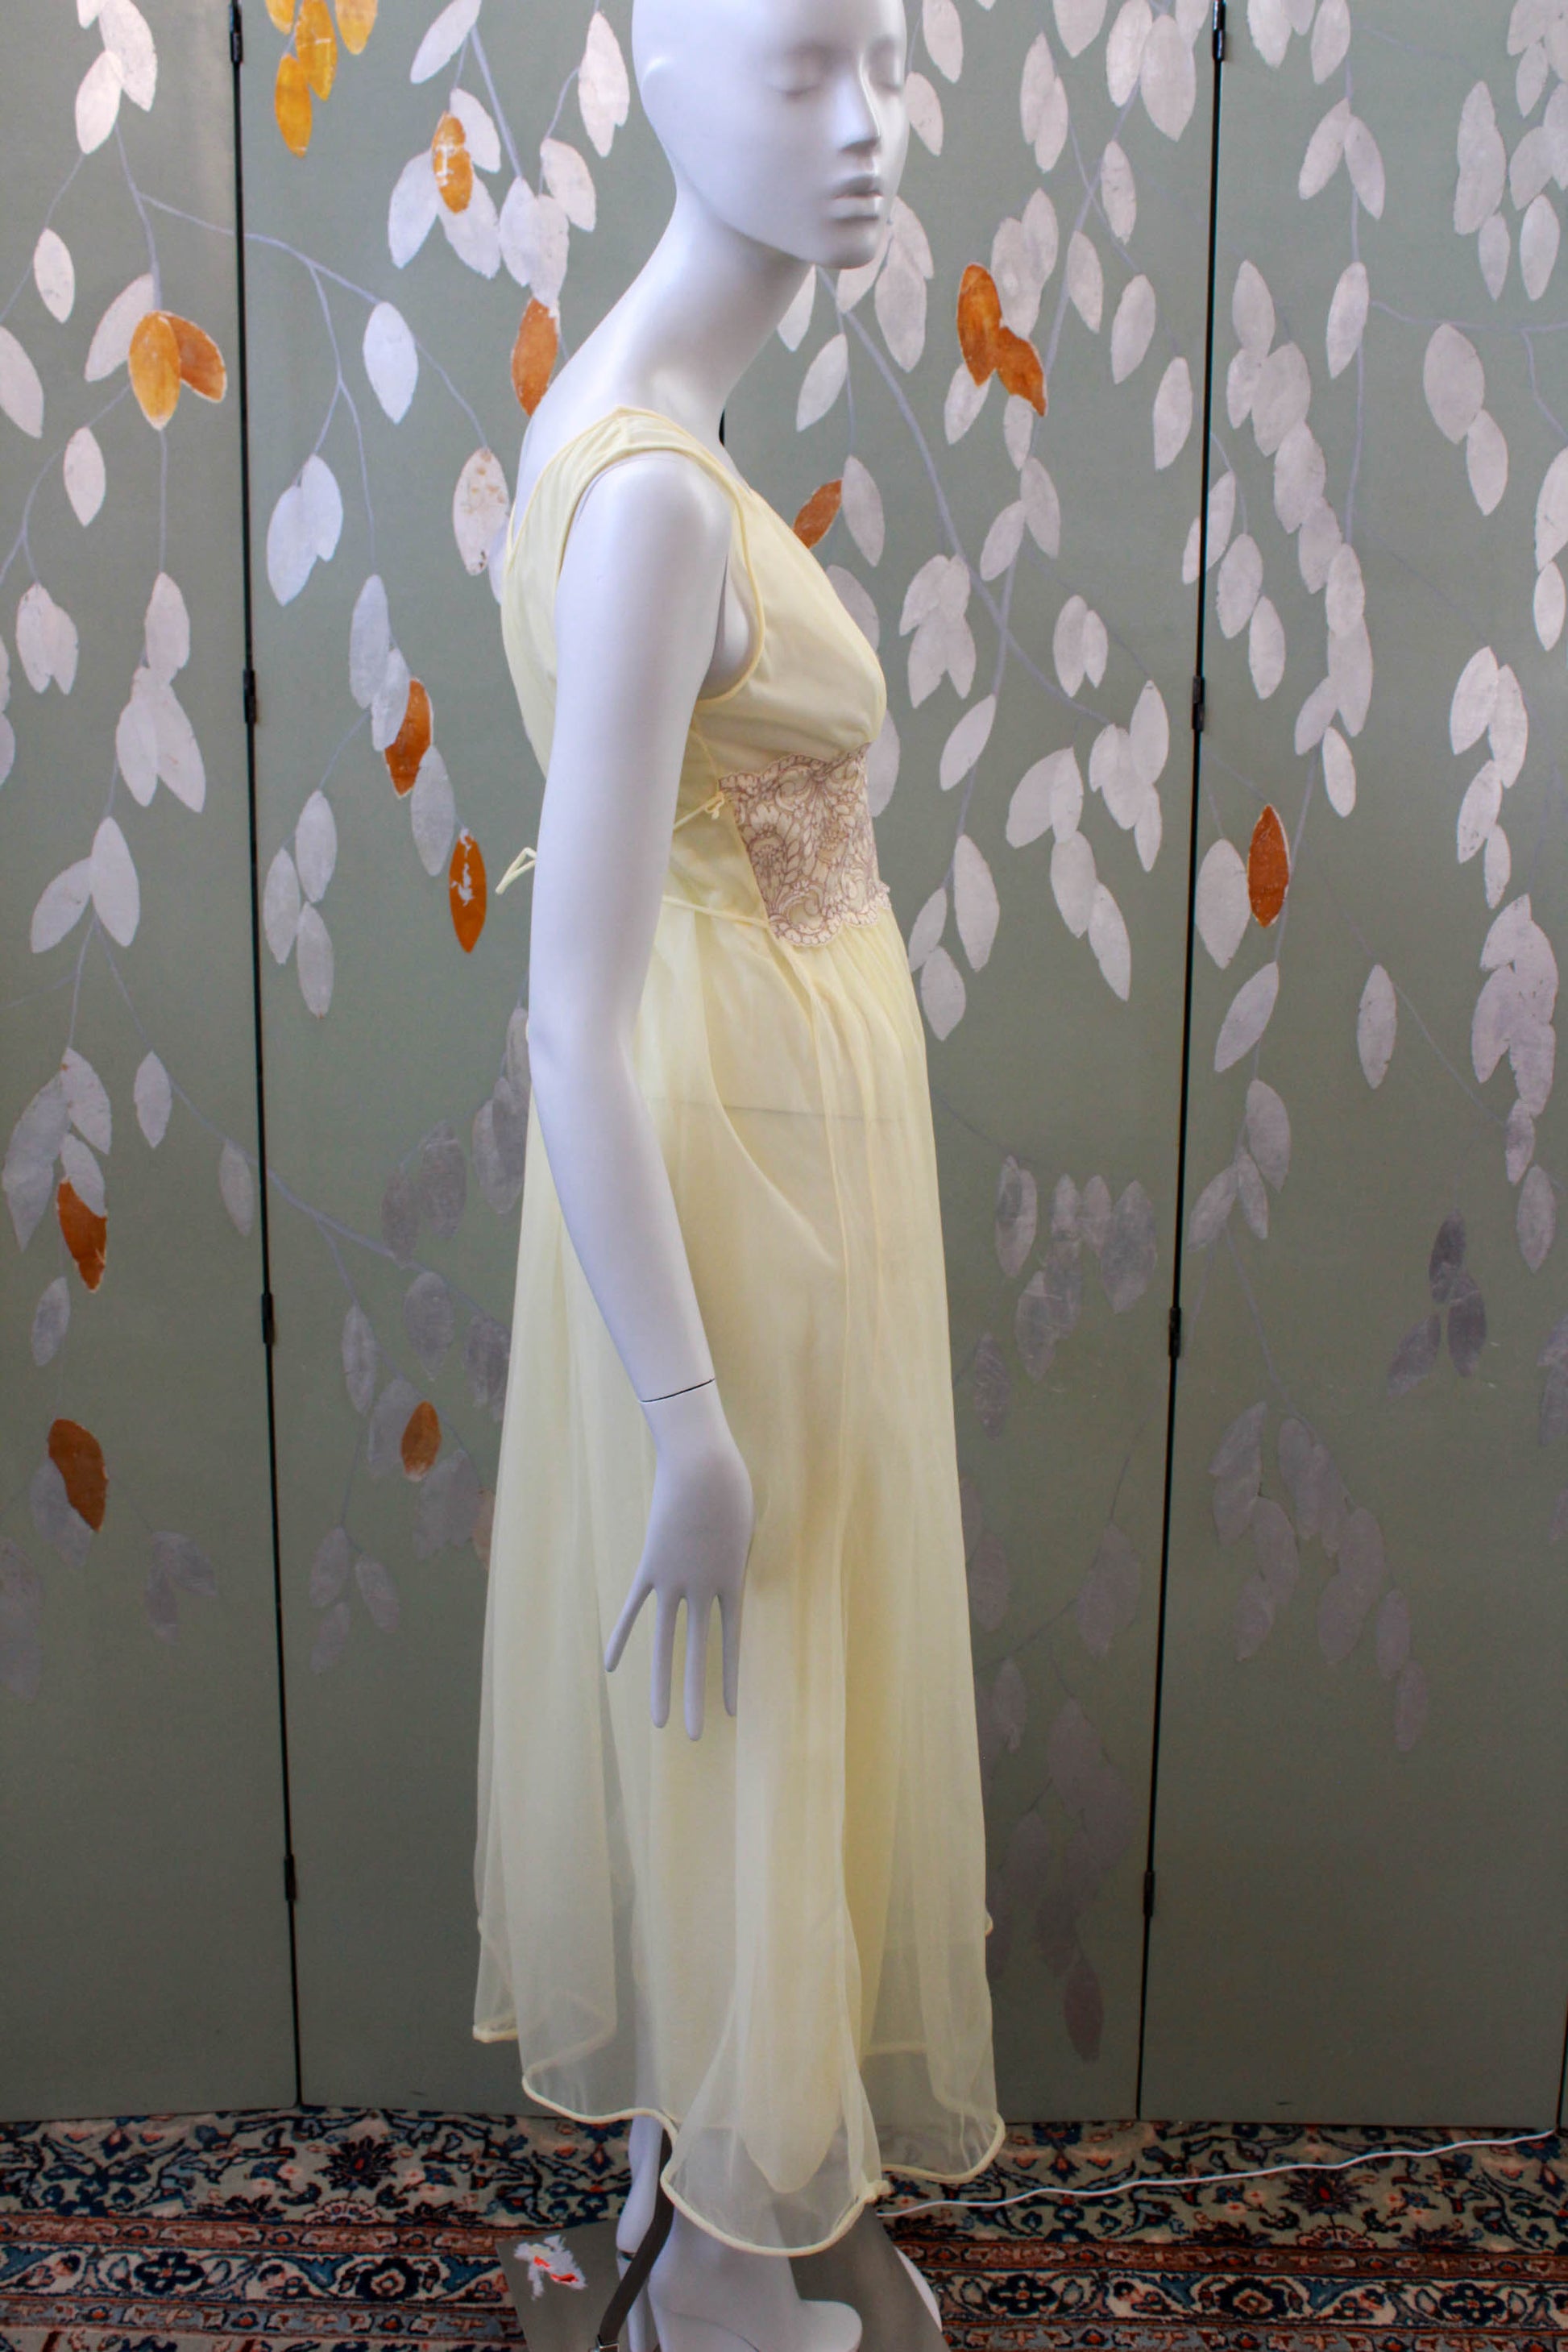 1960s pale yellow chiffon peignoir and nightgown / dressing gown set, lace trim on sleeves and empire waist, flowing coquette aesthetic feminine vintage romantic night gown